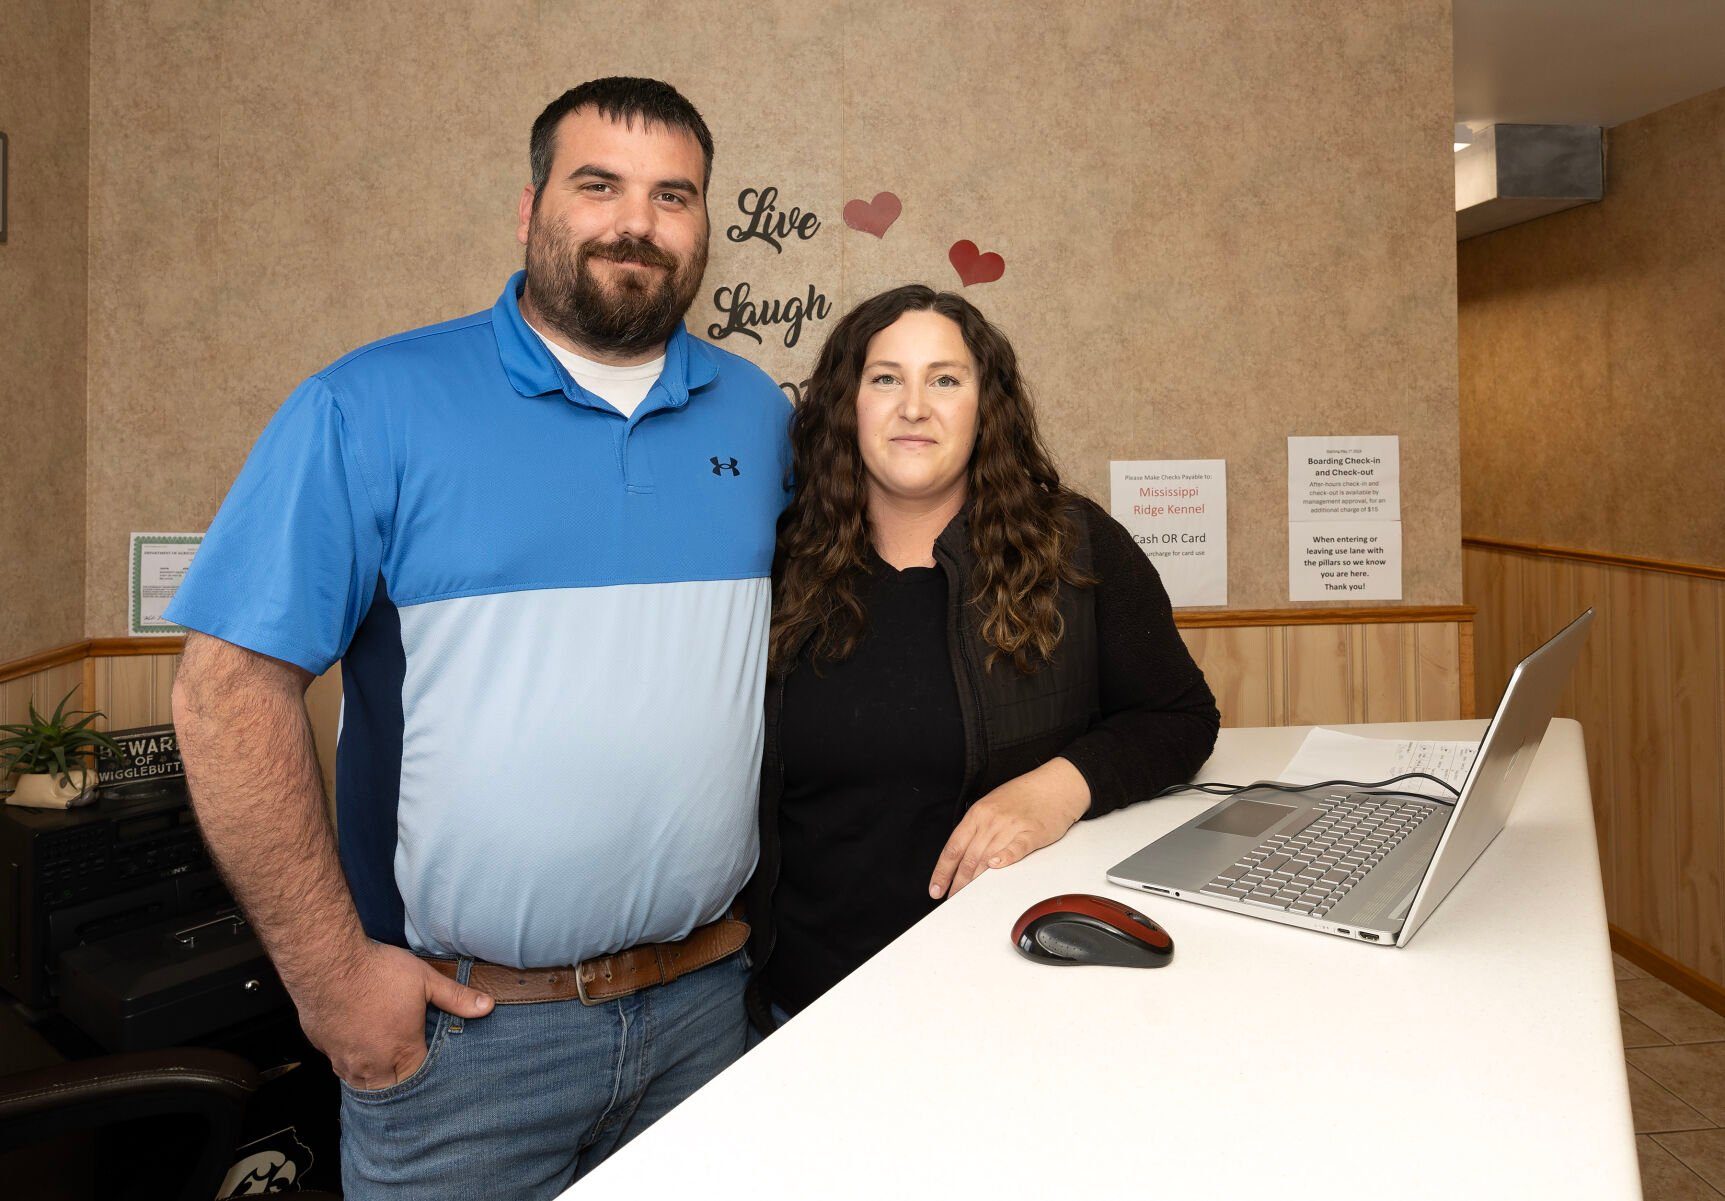 Jason and Haley Edwards stand in the lobby at Mississippi Ridge Kennel near Bellevue, Iowa.    PHOTO CREDIT: Stephen Gassman